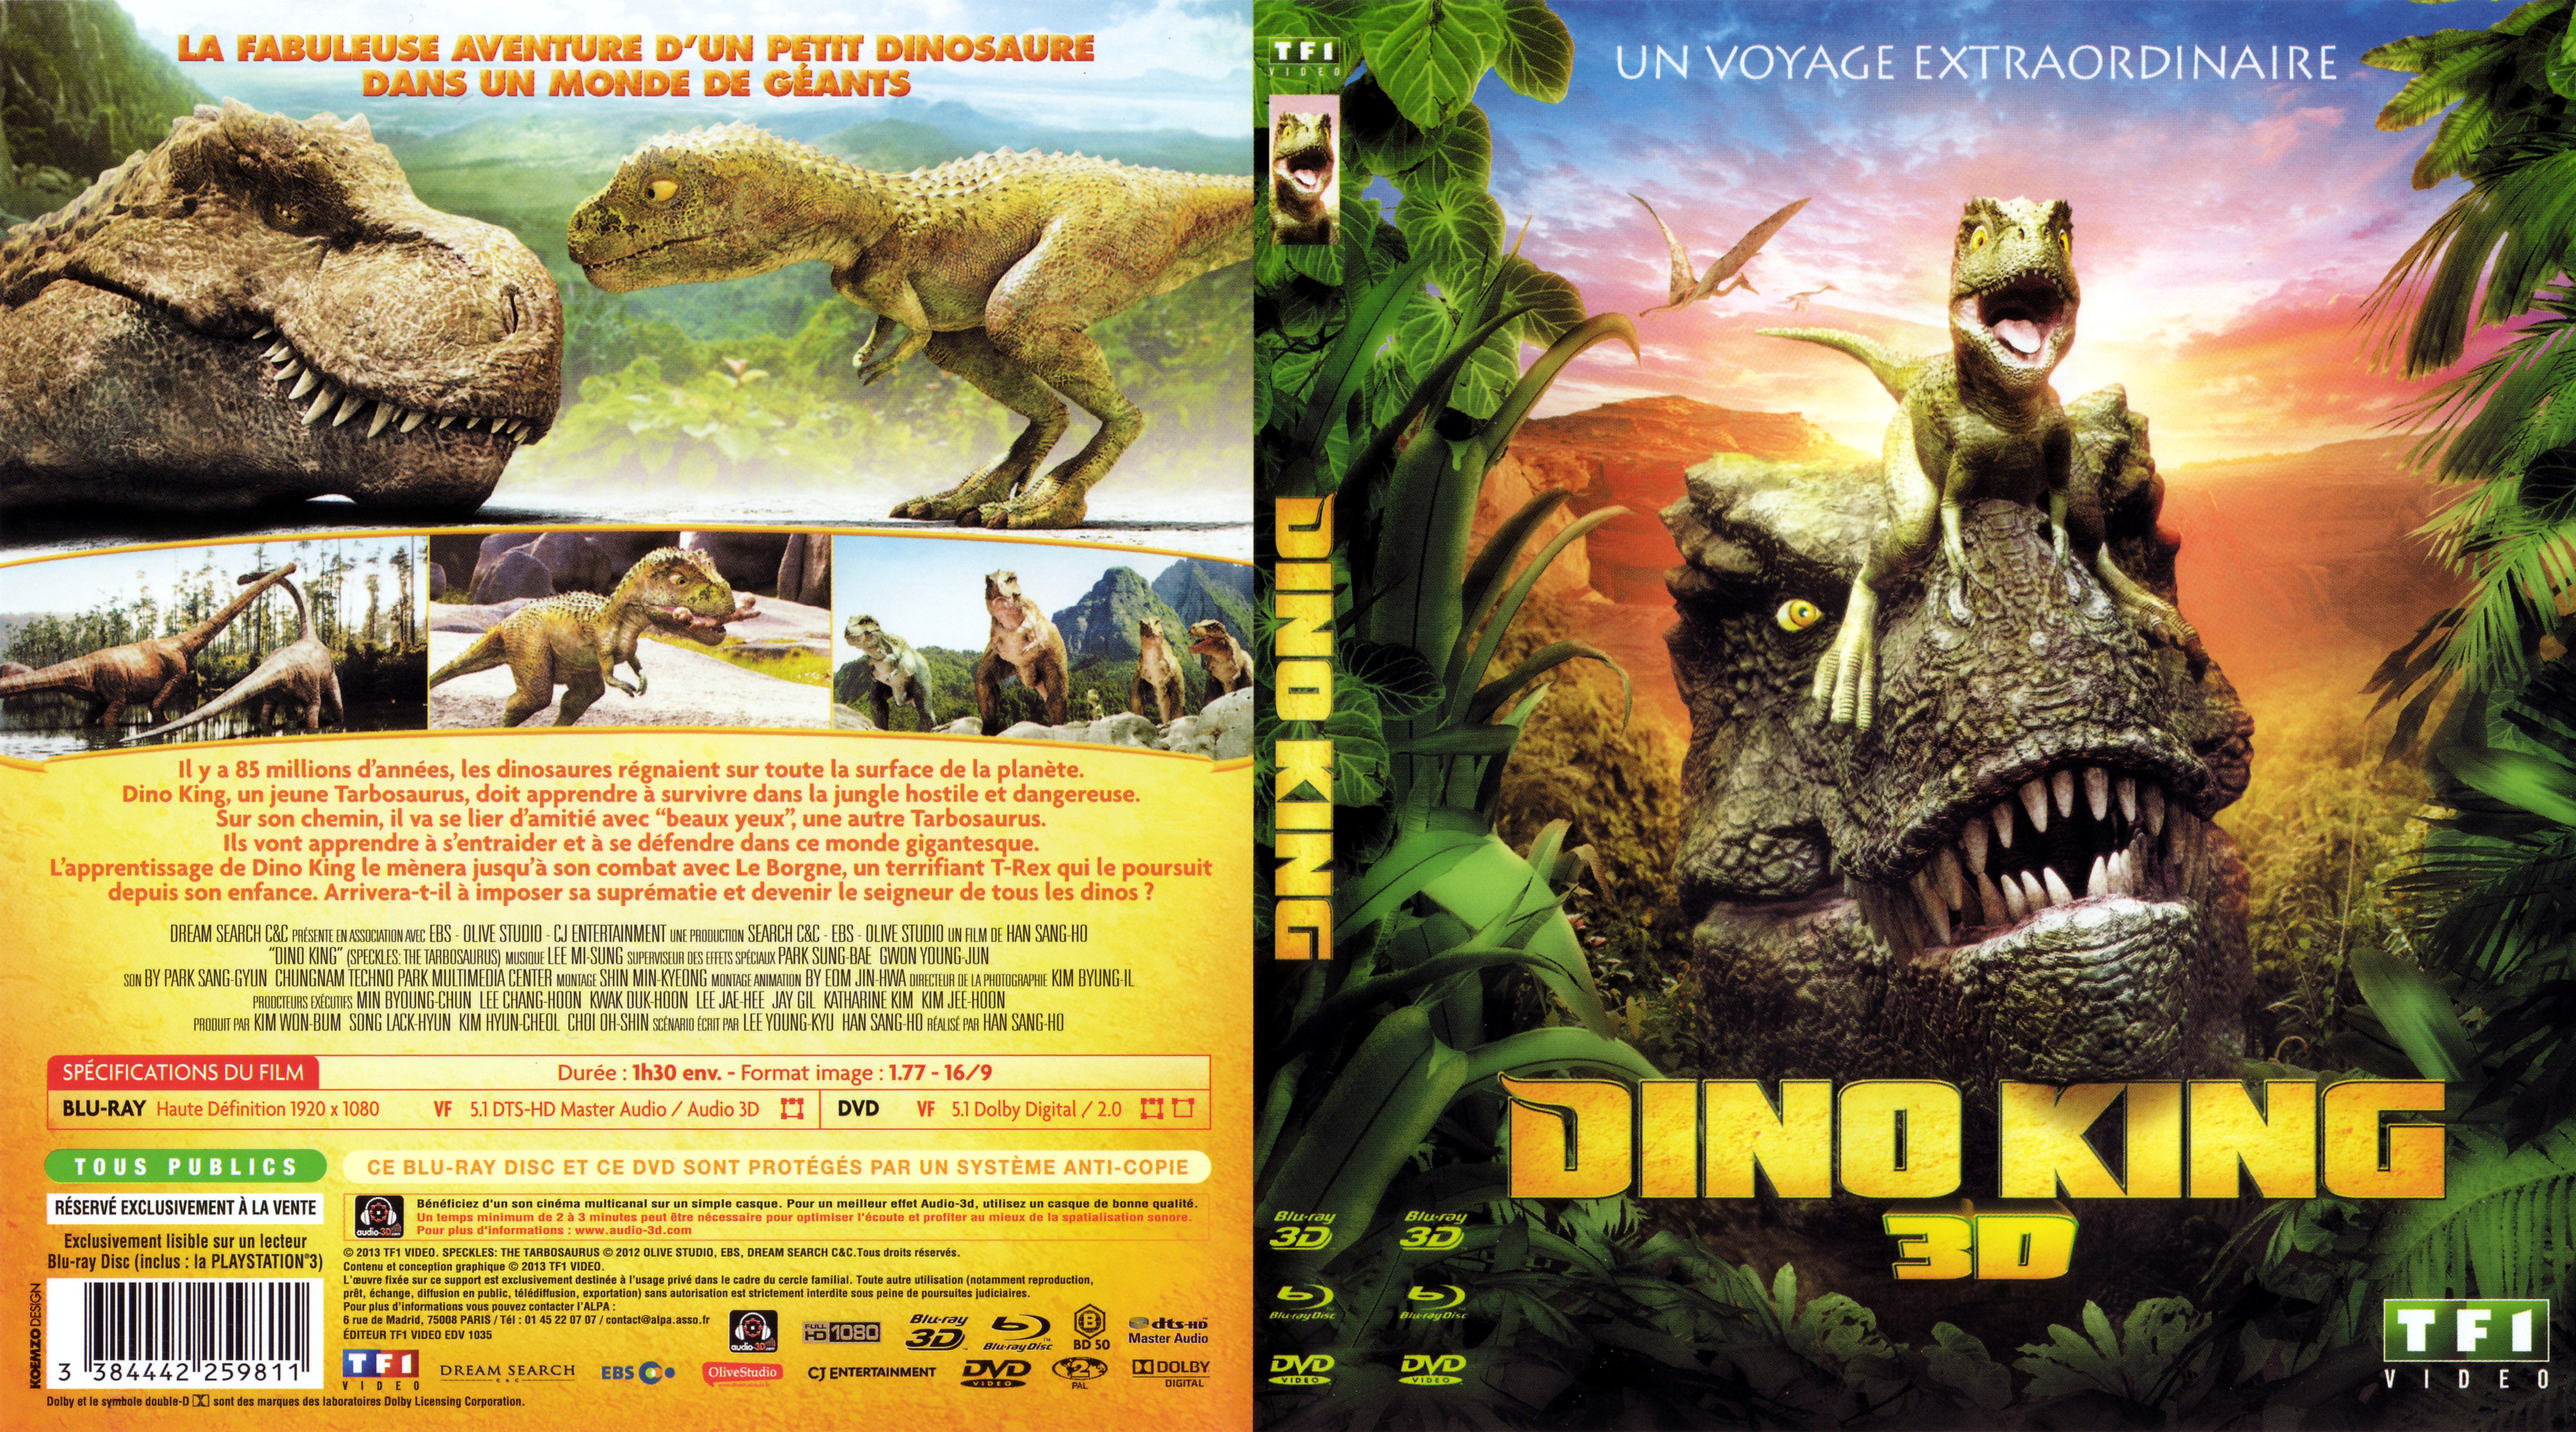 Jaquette DVD Dino King 3D (BLU-RAY)